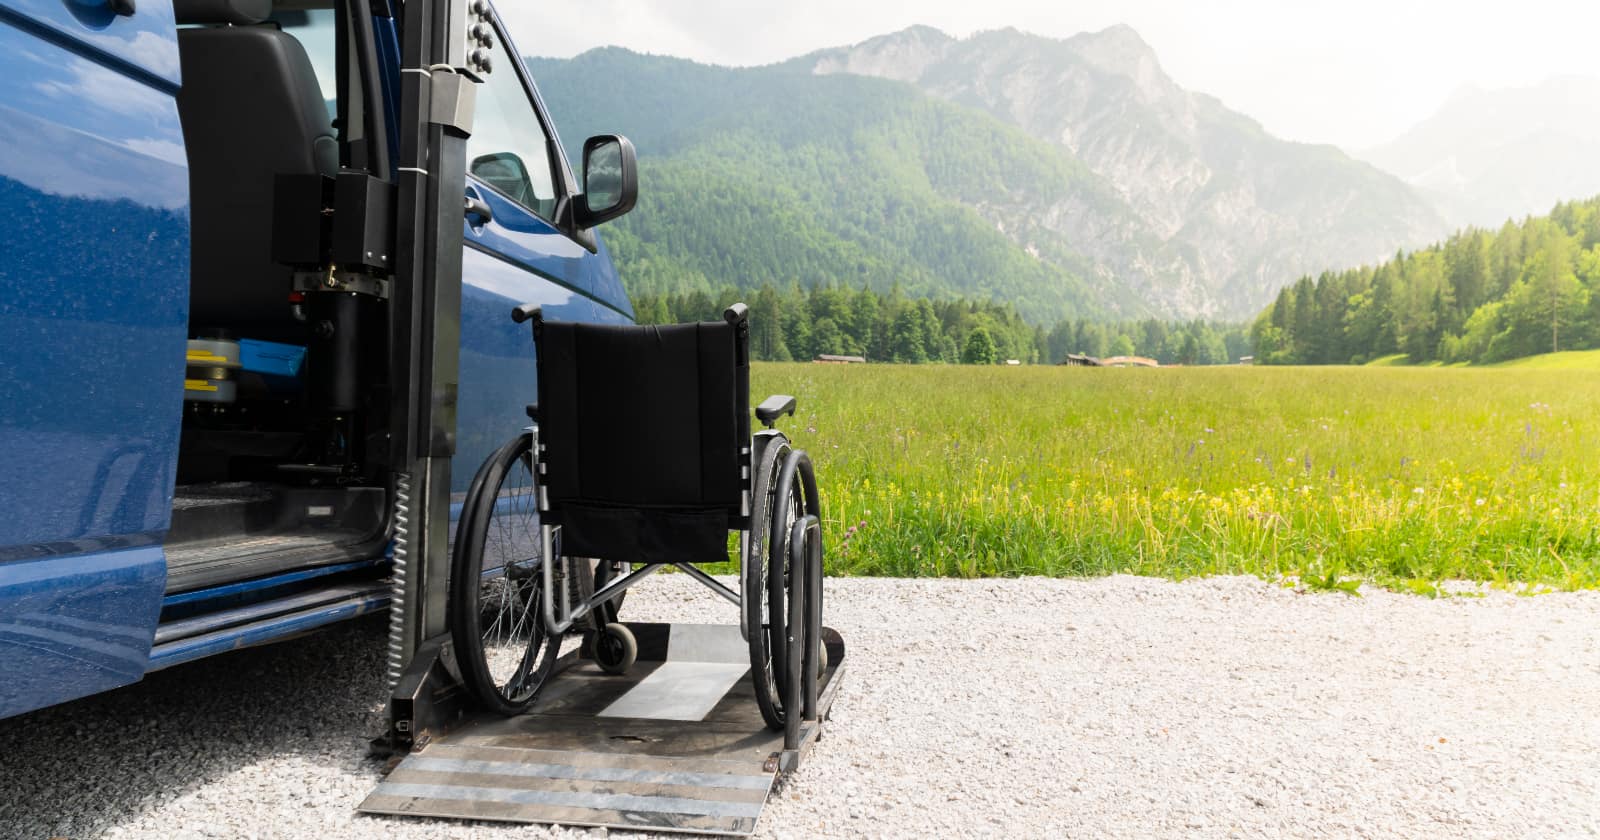 Empty wheelchair on a ramp of a campervan with nature and mountains in the background, RV modifications for disabilities are what help folks get out and travel